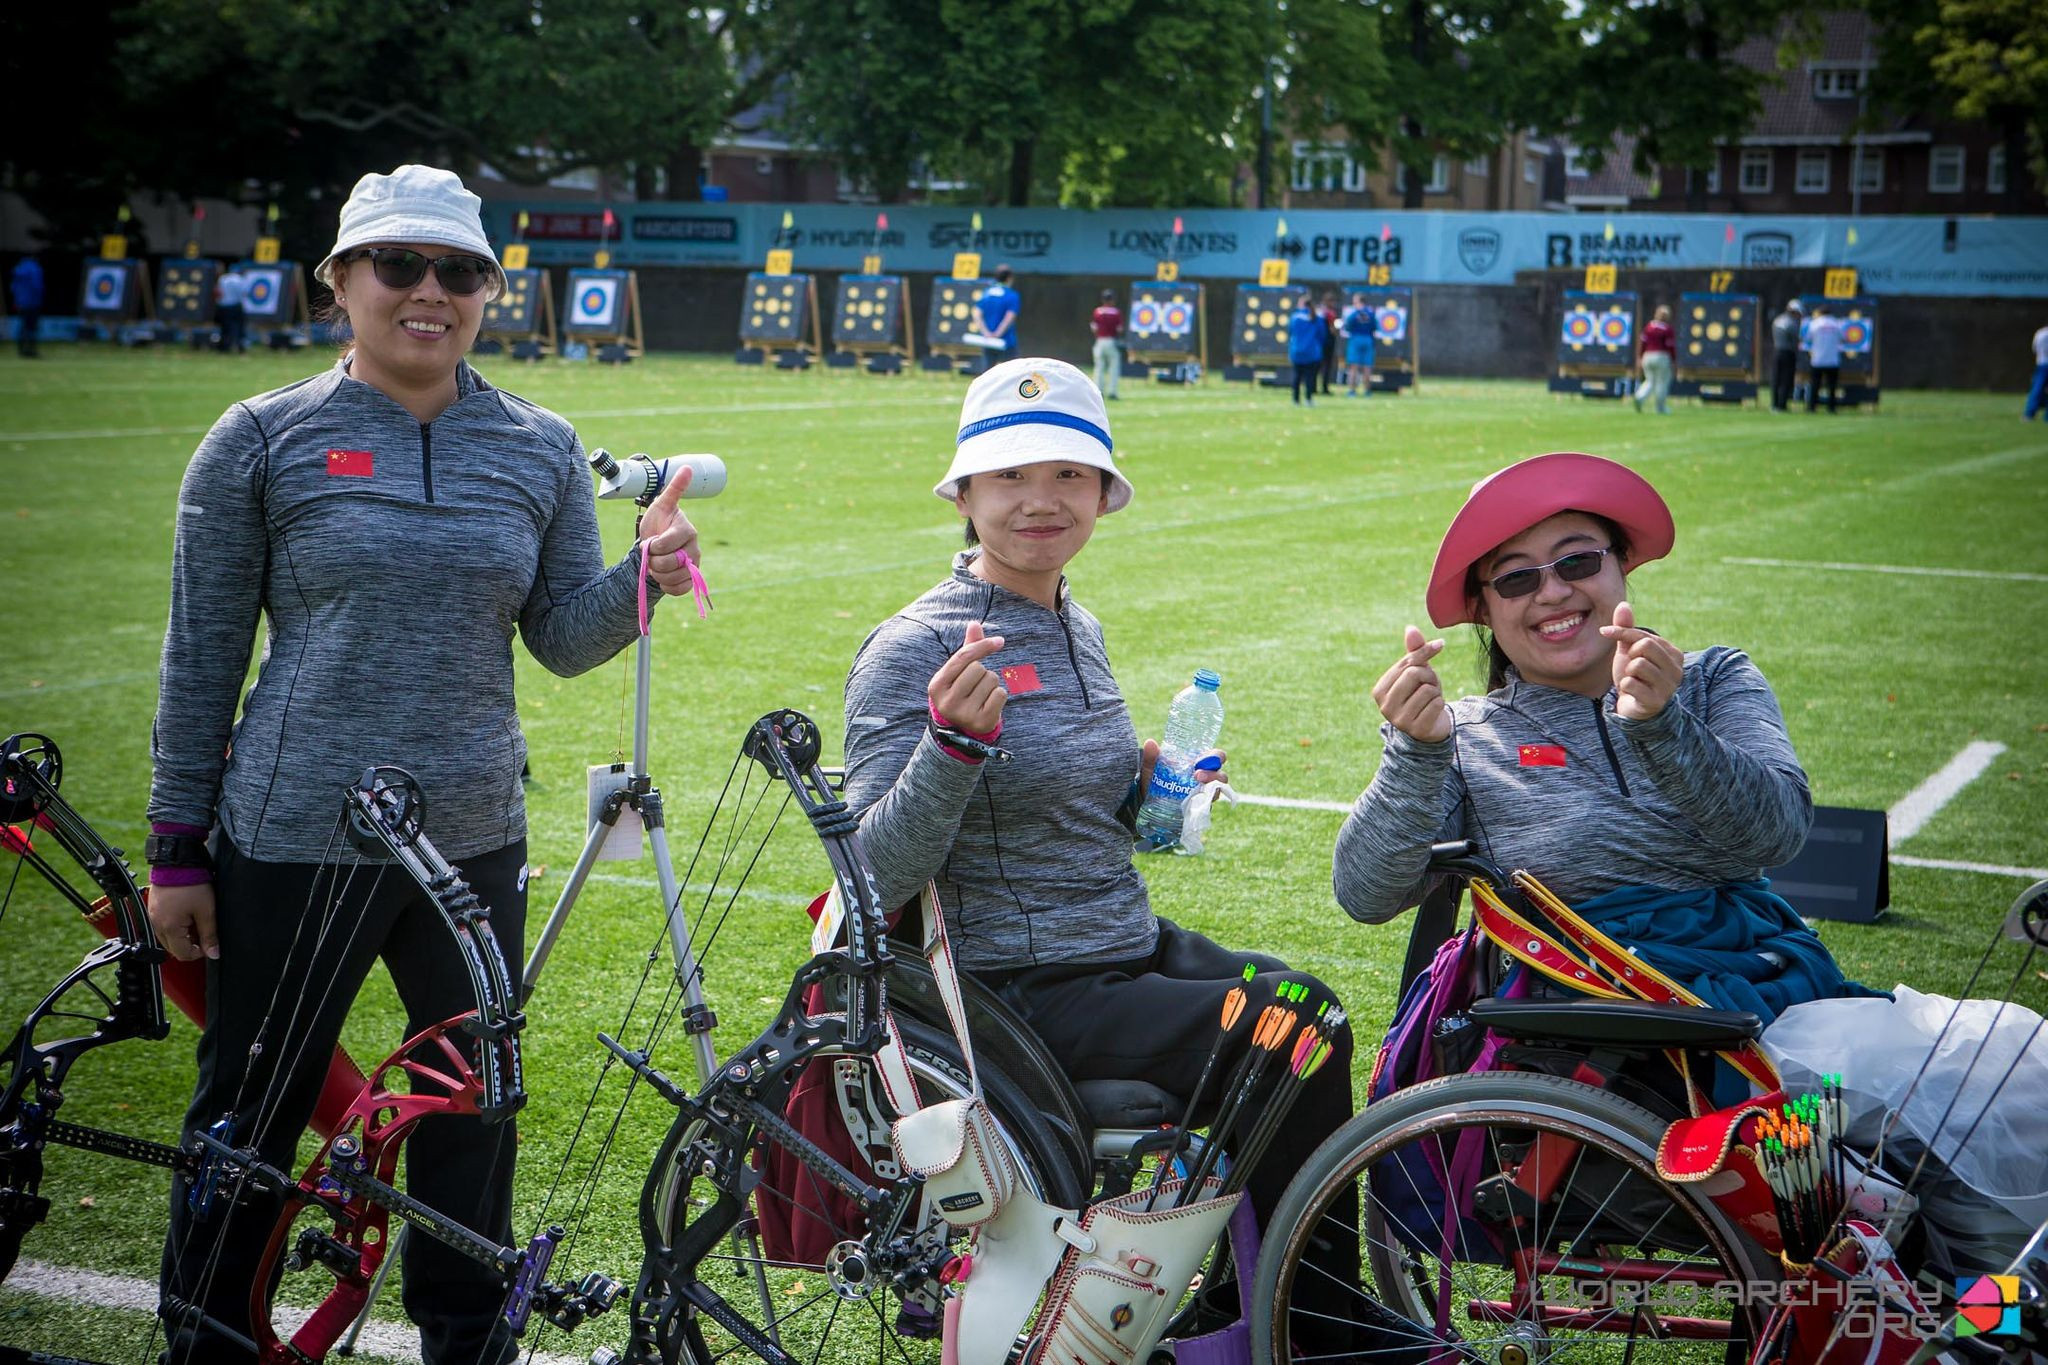 China set a world record in the compound women’s open team event at the World Archery Para Championships ©World Archery